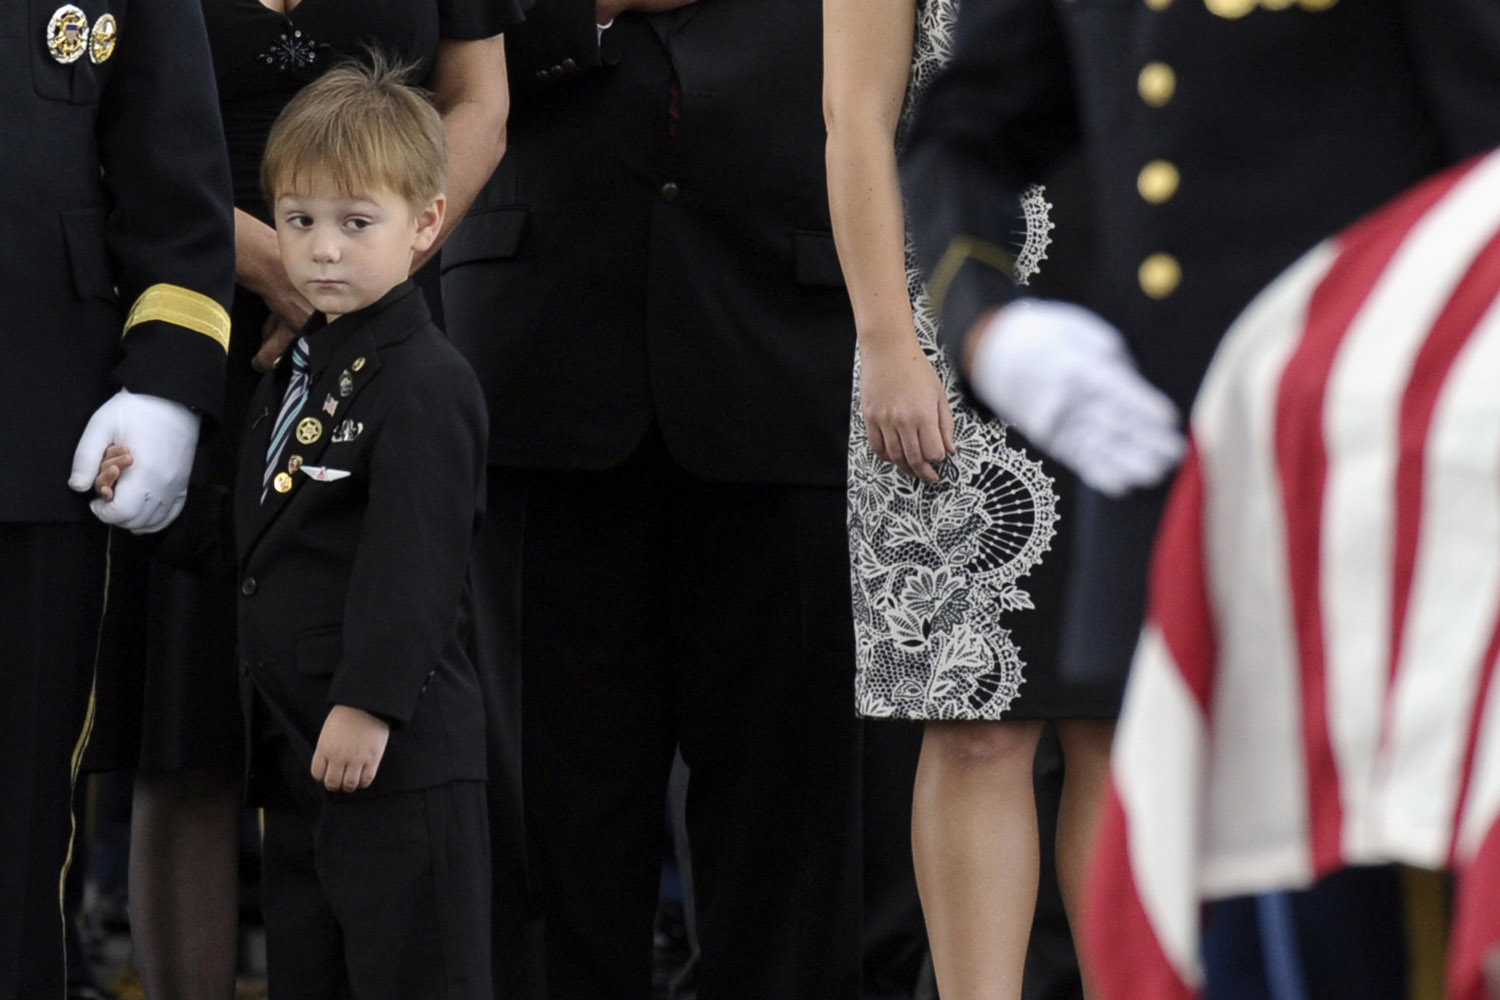 Sept. 27, 2013. Kaden Bowden, son of U.S. Army Staff Sgt. Joshua J. Bowden, looks at the casket for his father during burial services for Staff Sgt. Bowden at Arlington National Cemetery in Arlington, Va.